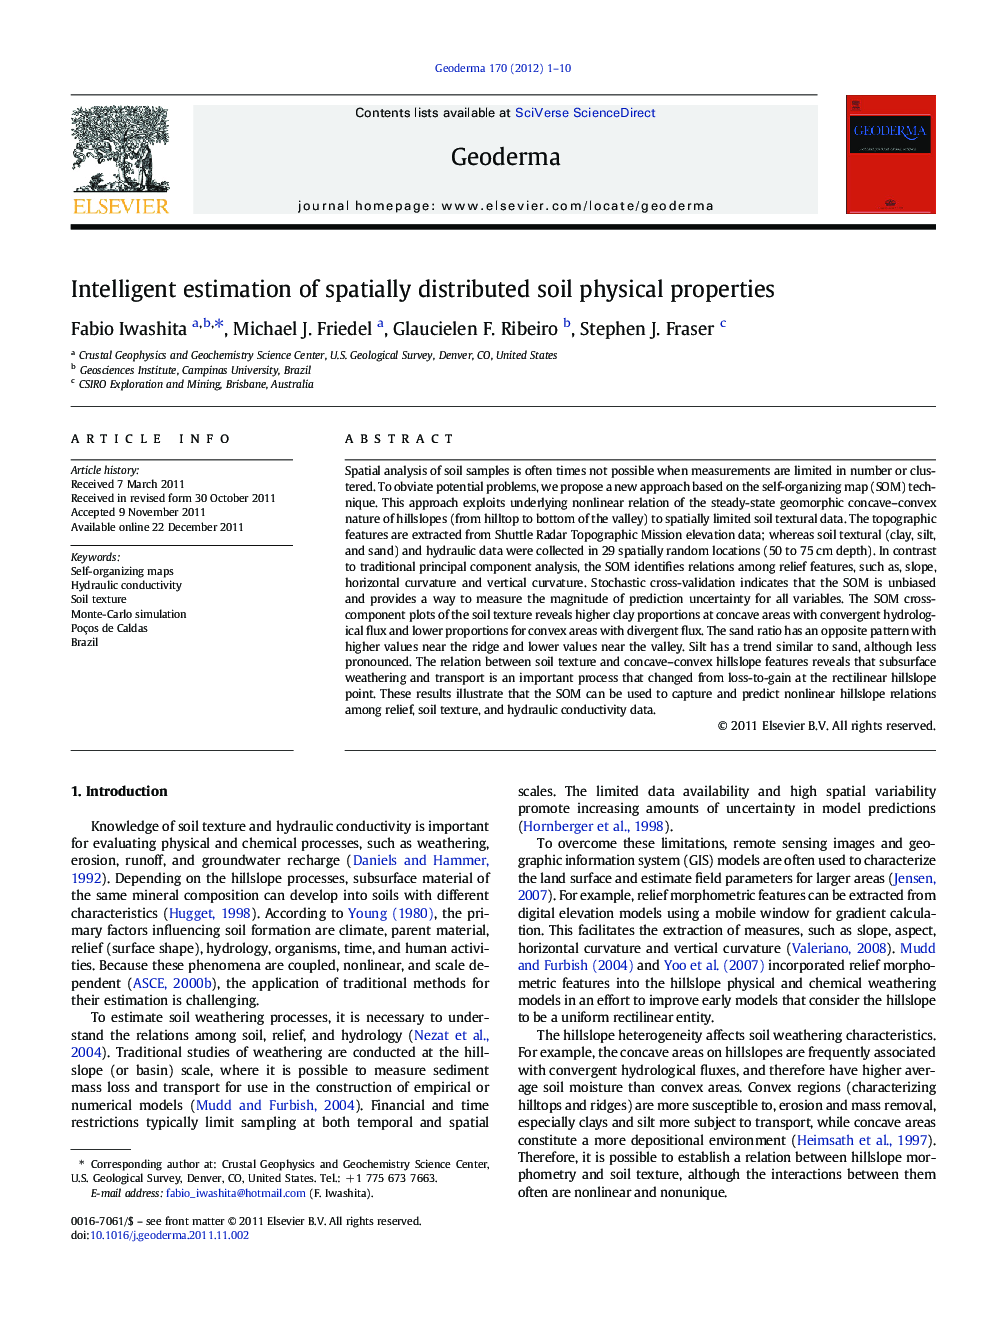 Intelligent estimation of spatially distributed soil physical properties